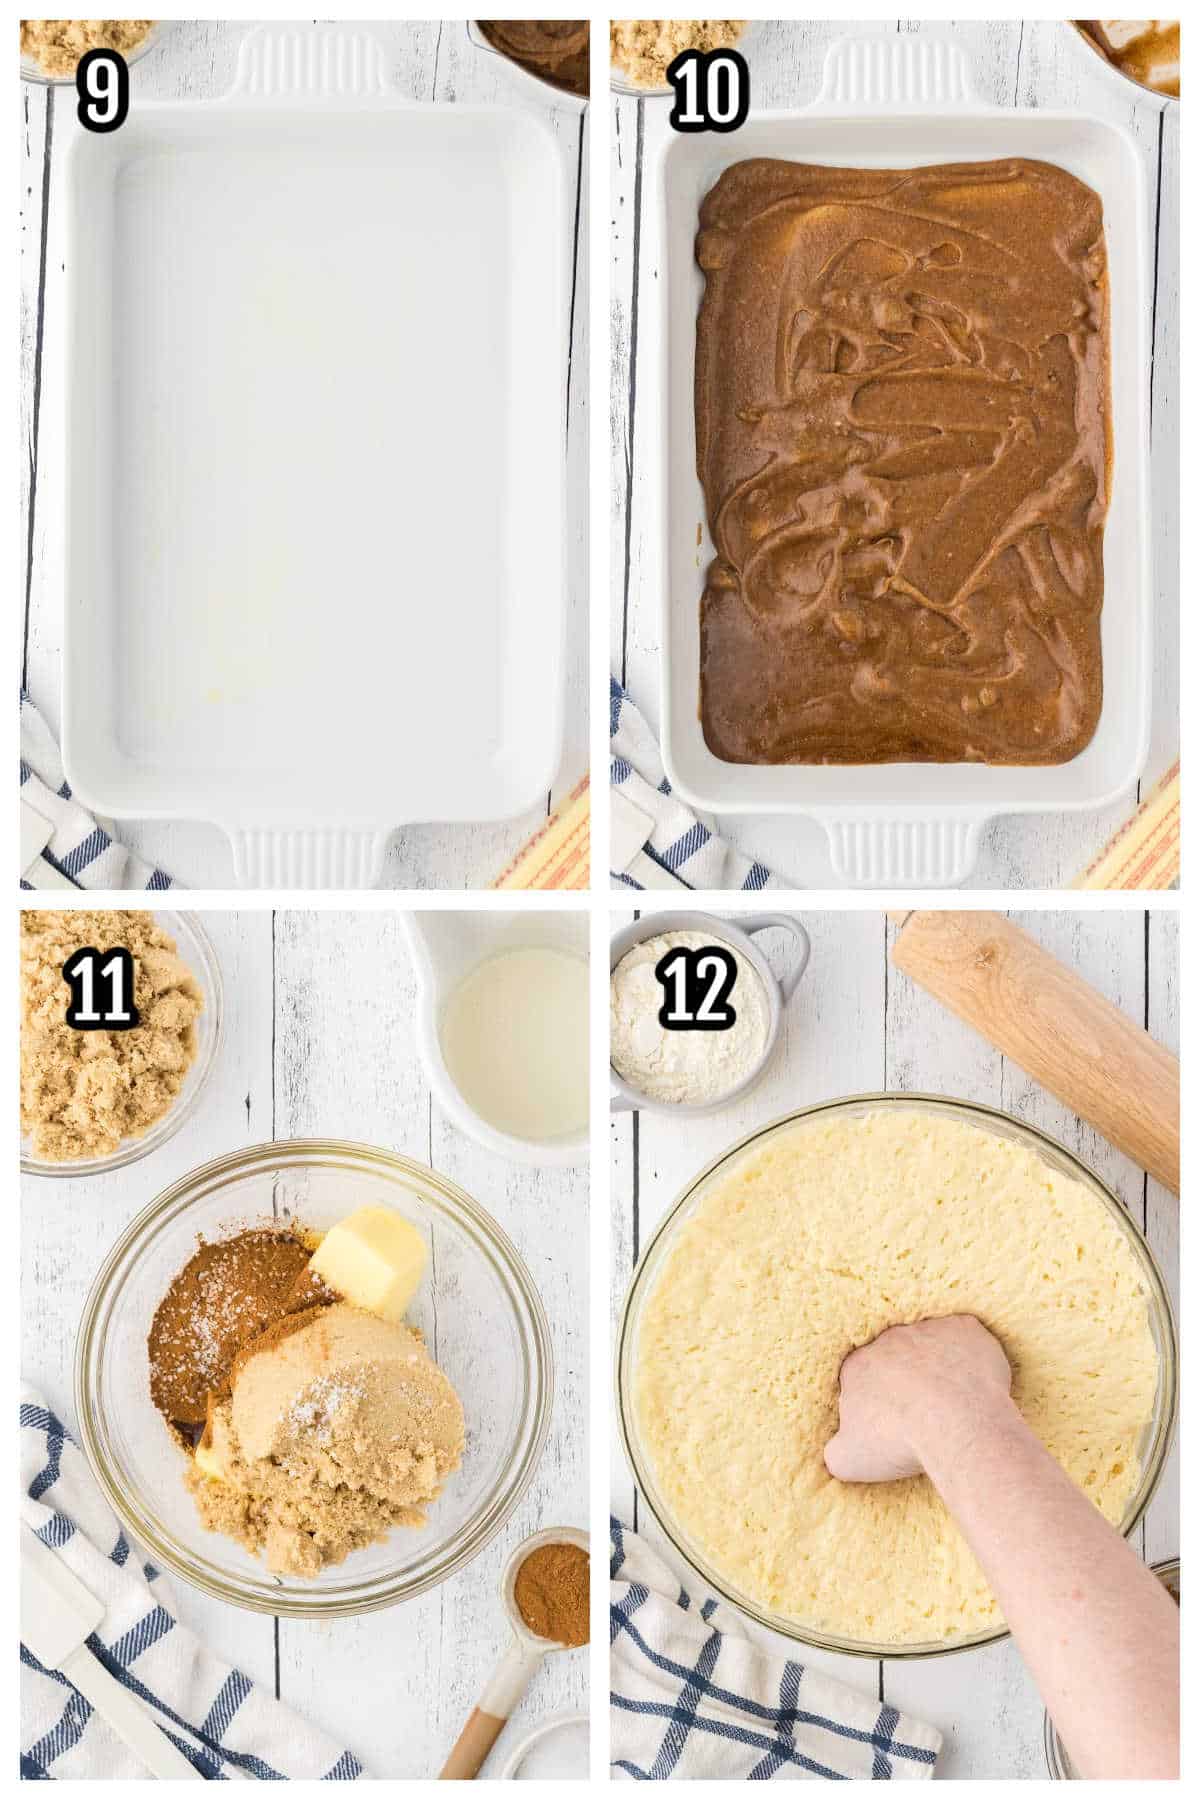 The third collage shows steps nine through twelve for making the cinnamon rolls. 